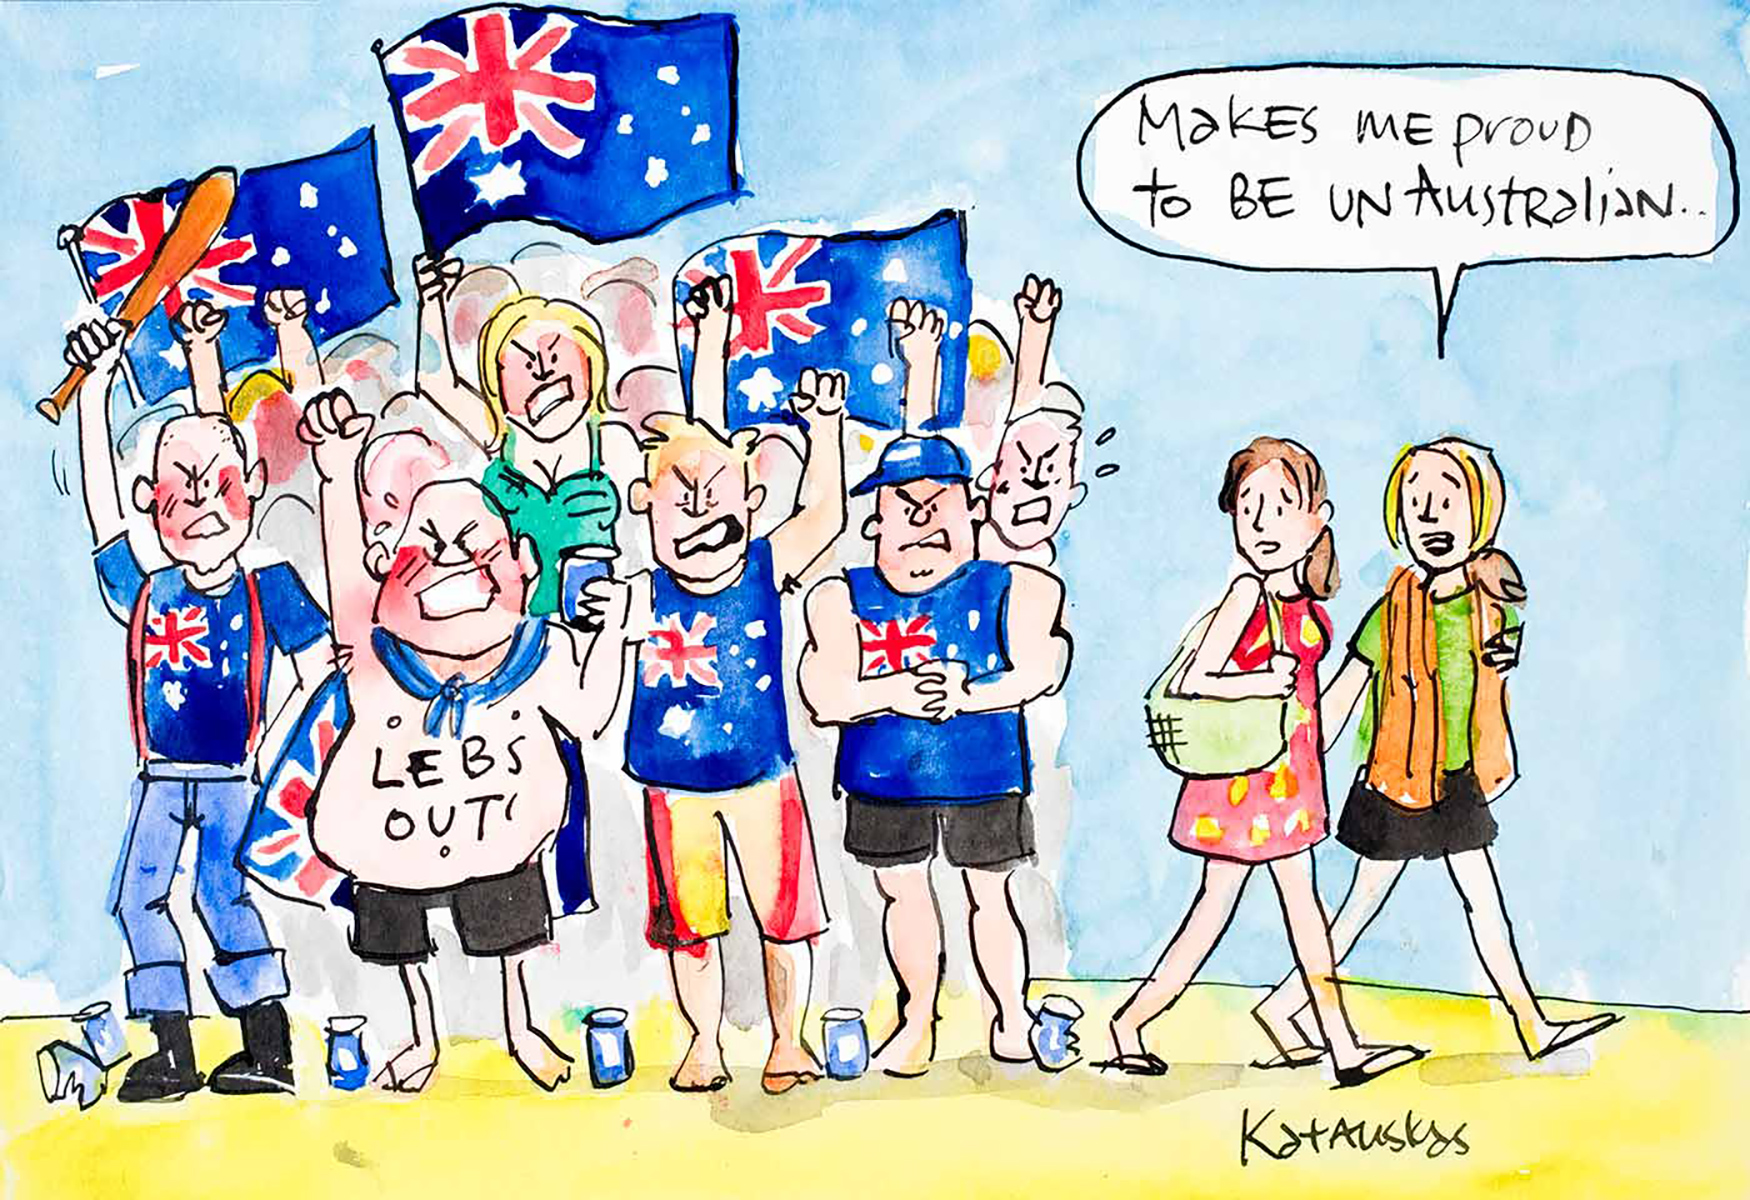 Political cartoon of a group of angry looking people holding up Australian flags and baseball bats, wearing Australian flag t-shirts and drinking beer, with two girls walking past commenting that this behaviour makes them proud to be unAustralian. - click to view larger image